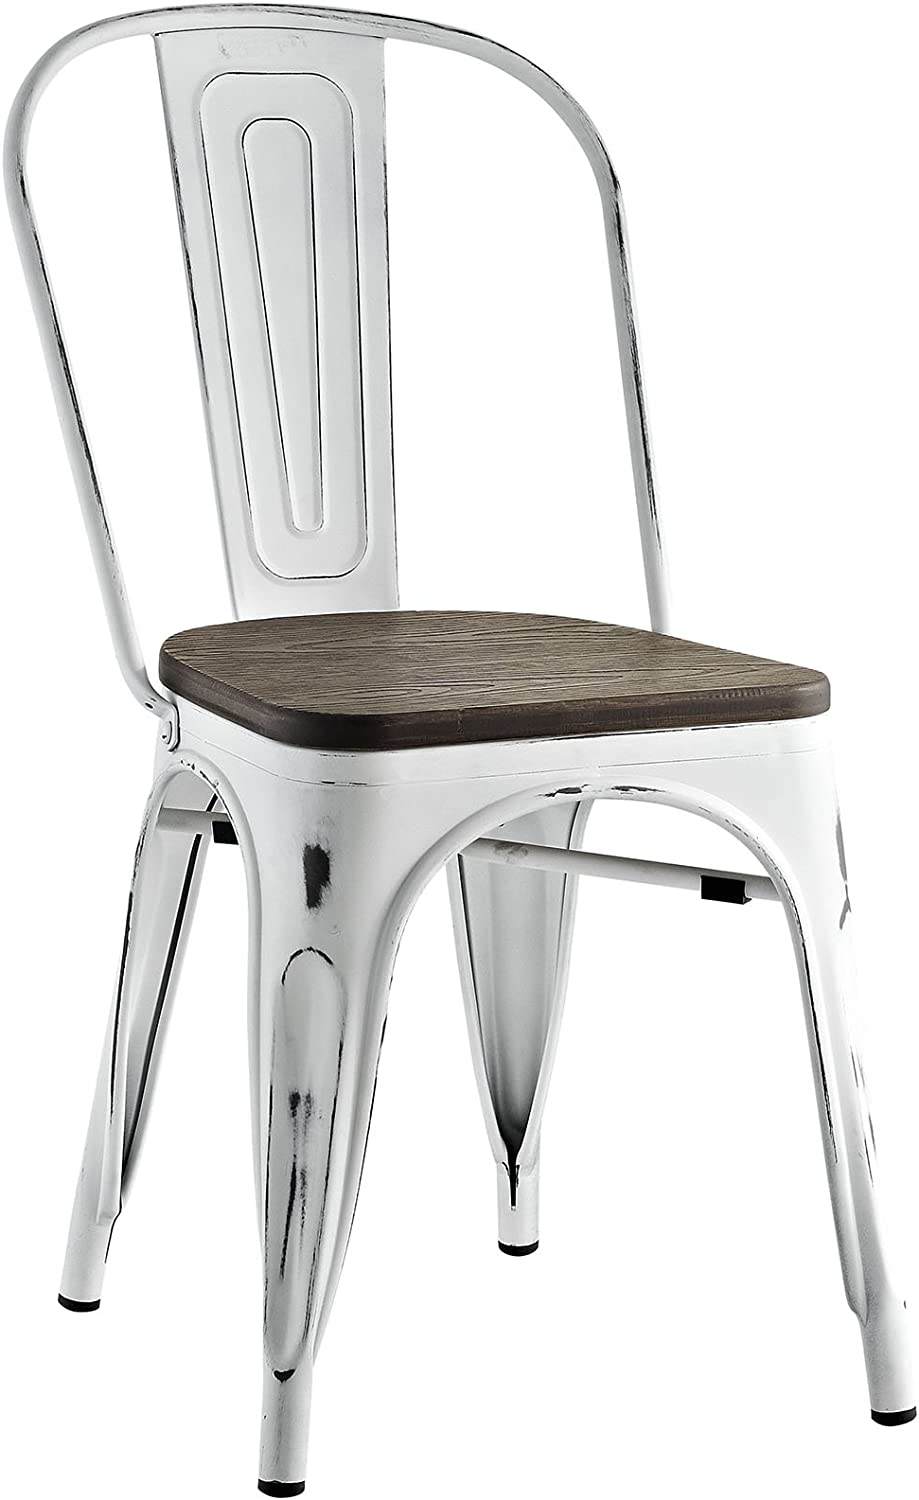 Modway EEI-2028-WHI Promenade Stackable Modern Aluminum Bistro Dining Side Chair With Bamboo Seat, One, White